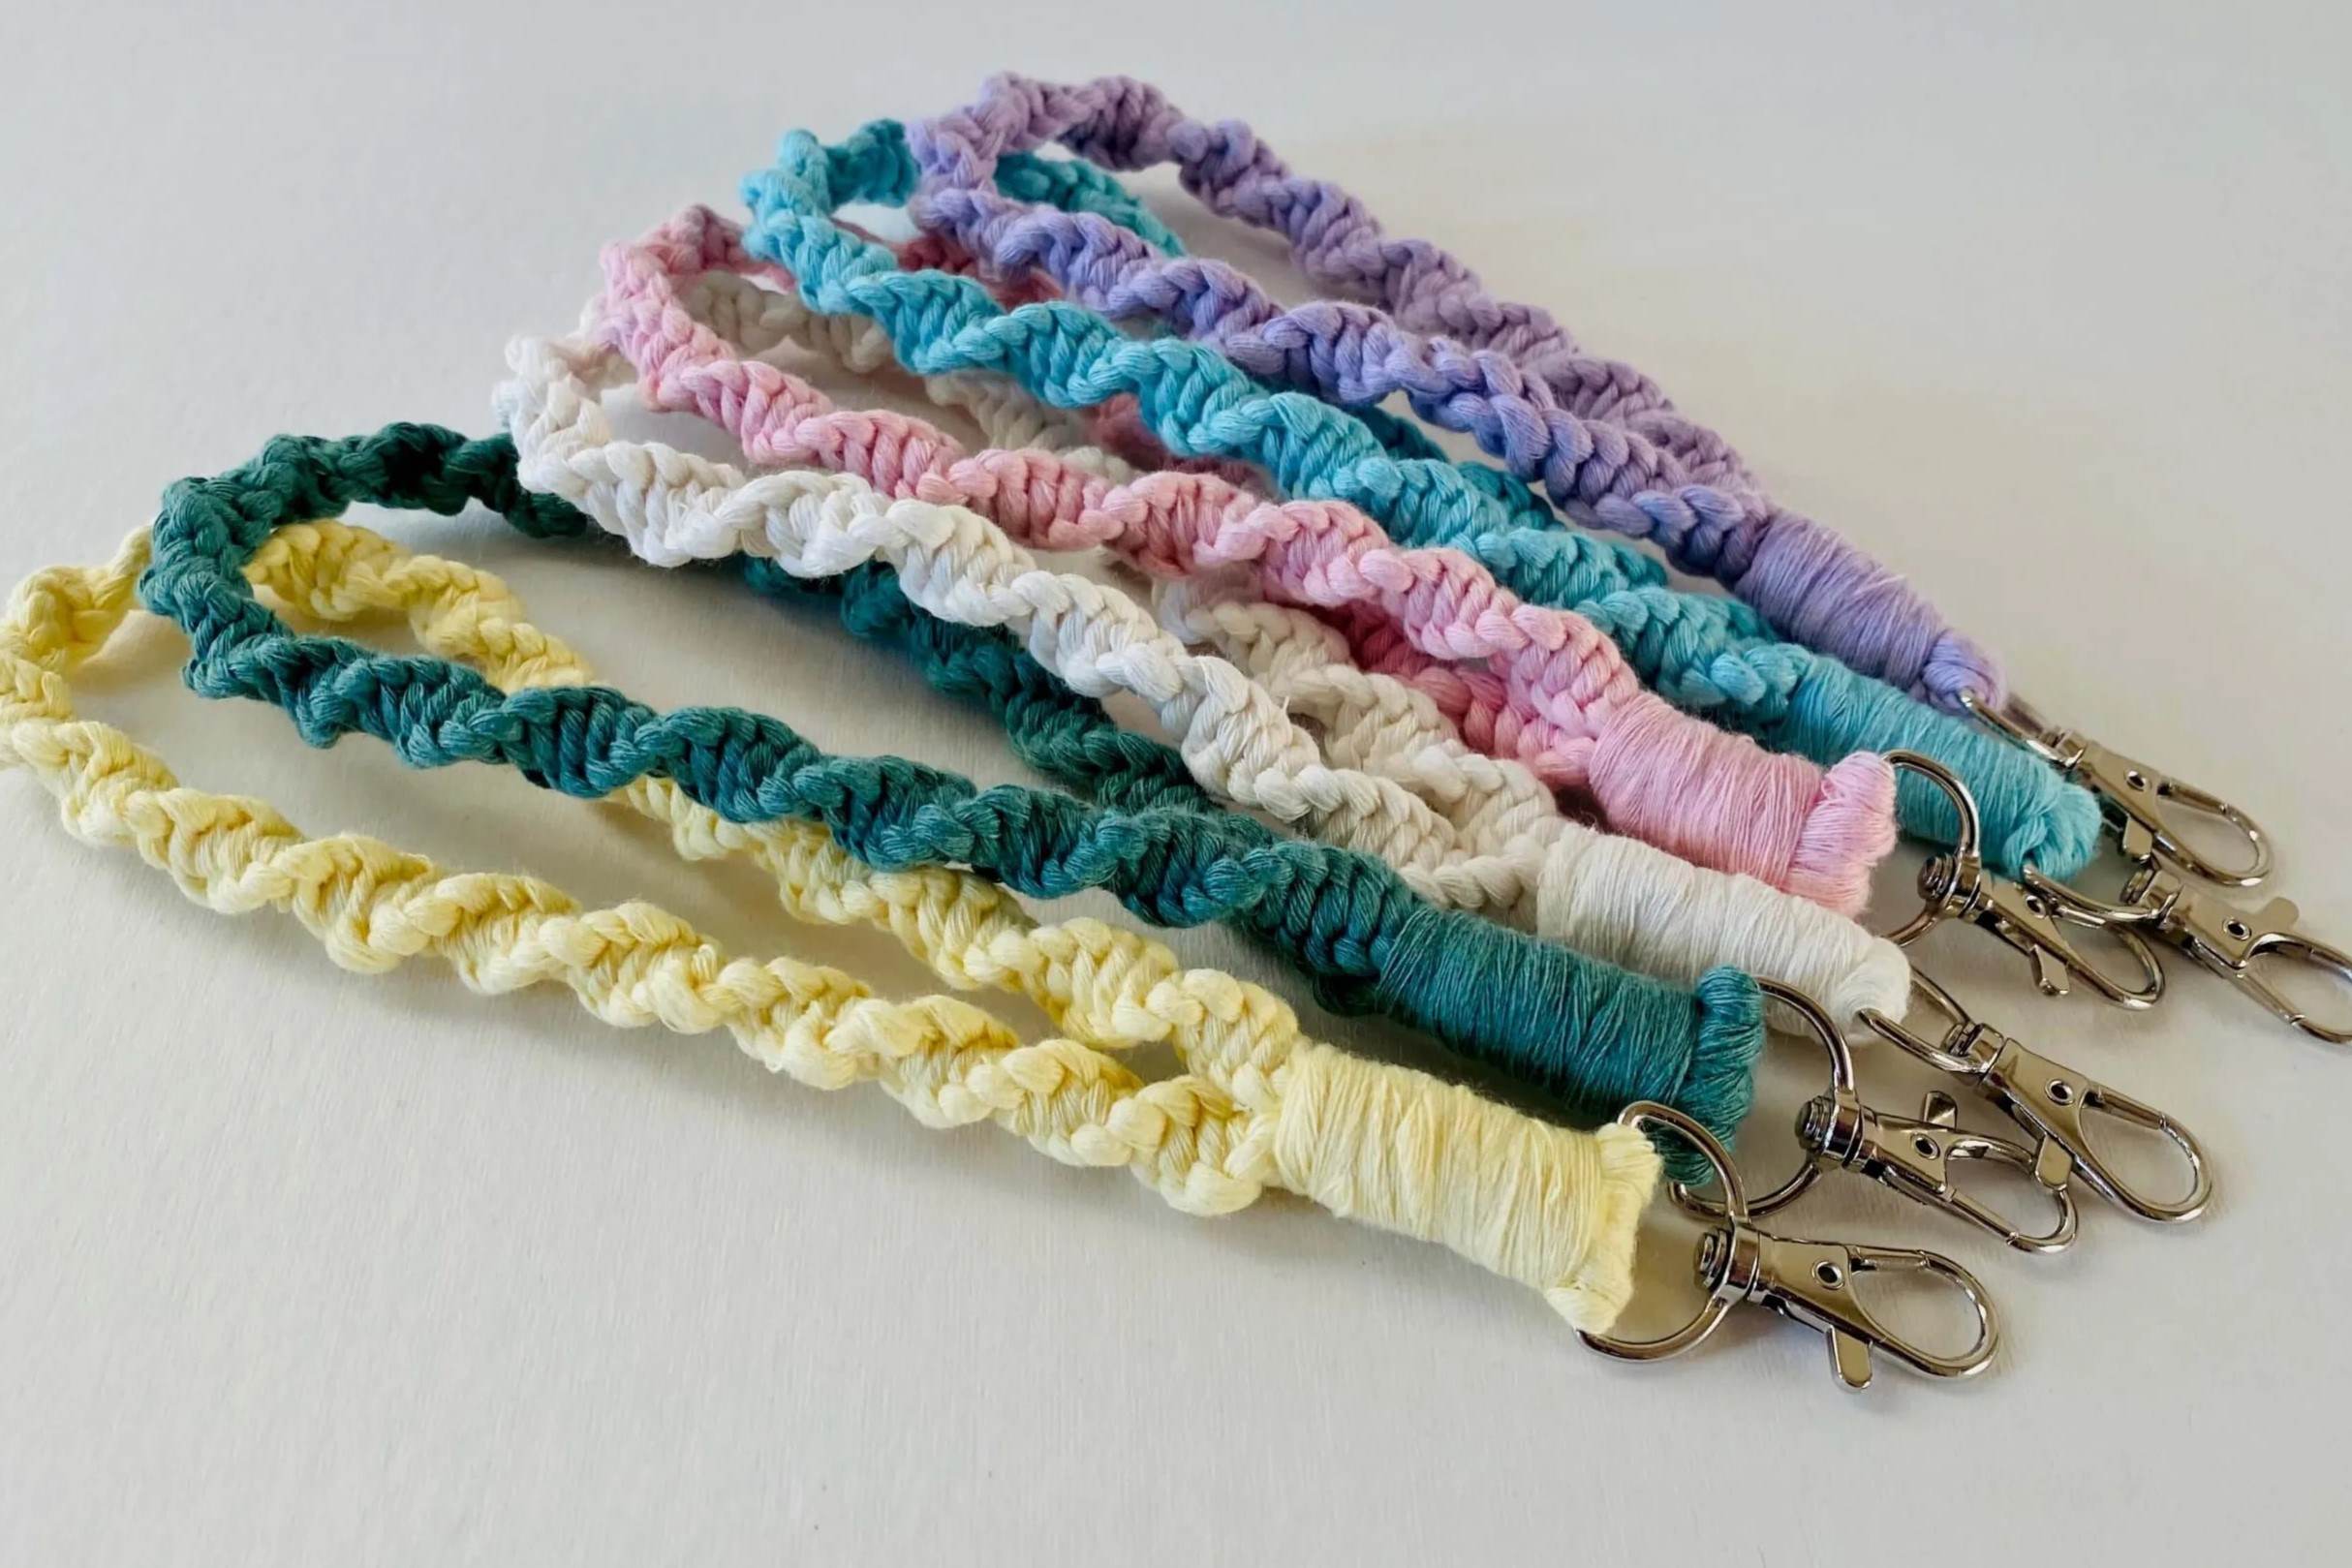 spiraled-elegance-step-by-step-instructions-on-making-a-spiral-lanyard